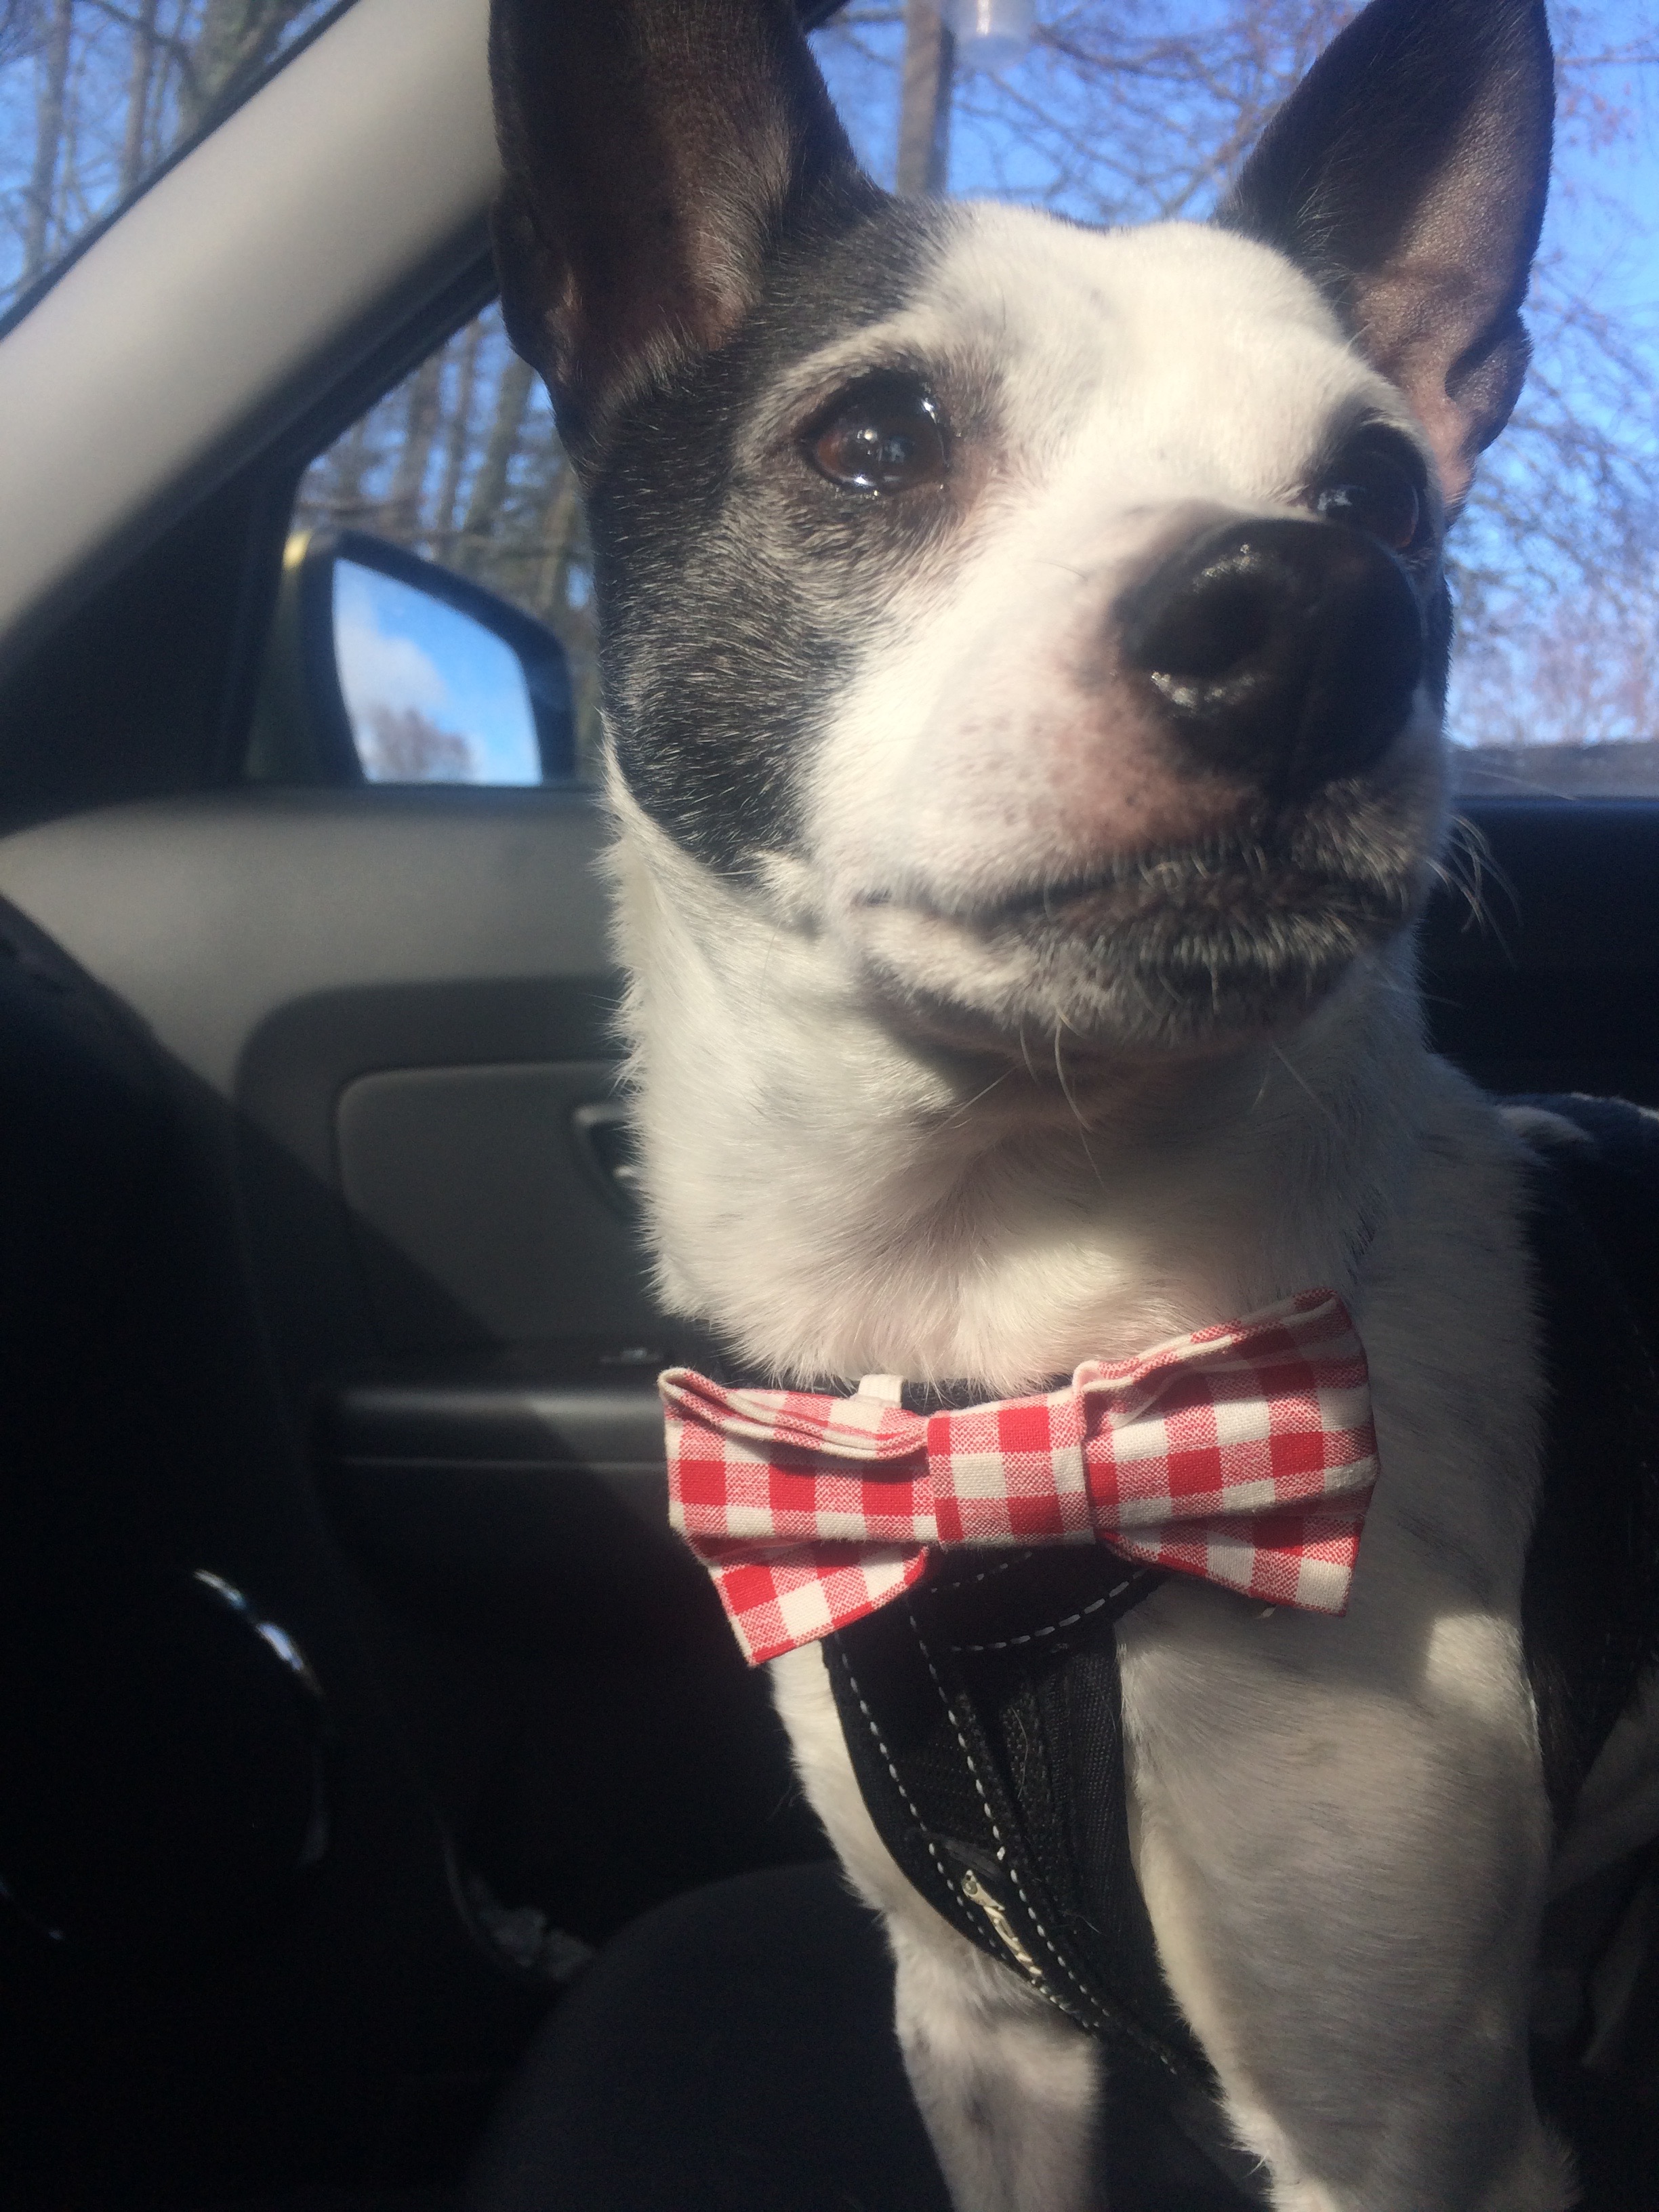 Sometimes, Duke comes to work with me. He always dresses up for it.